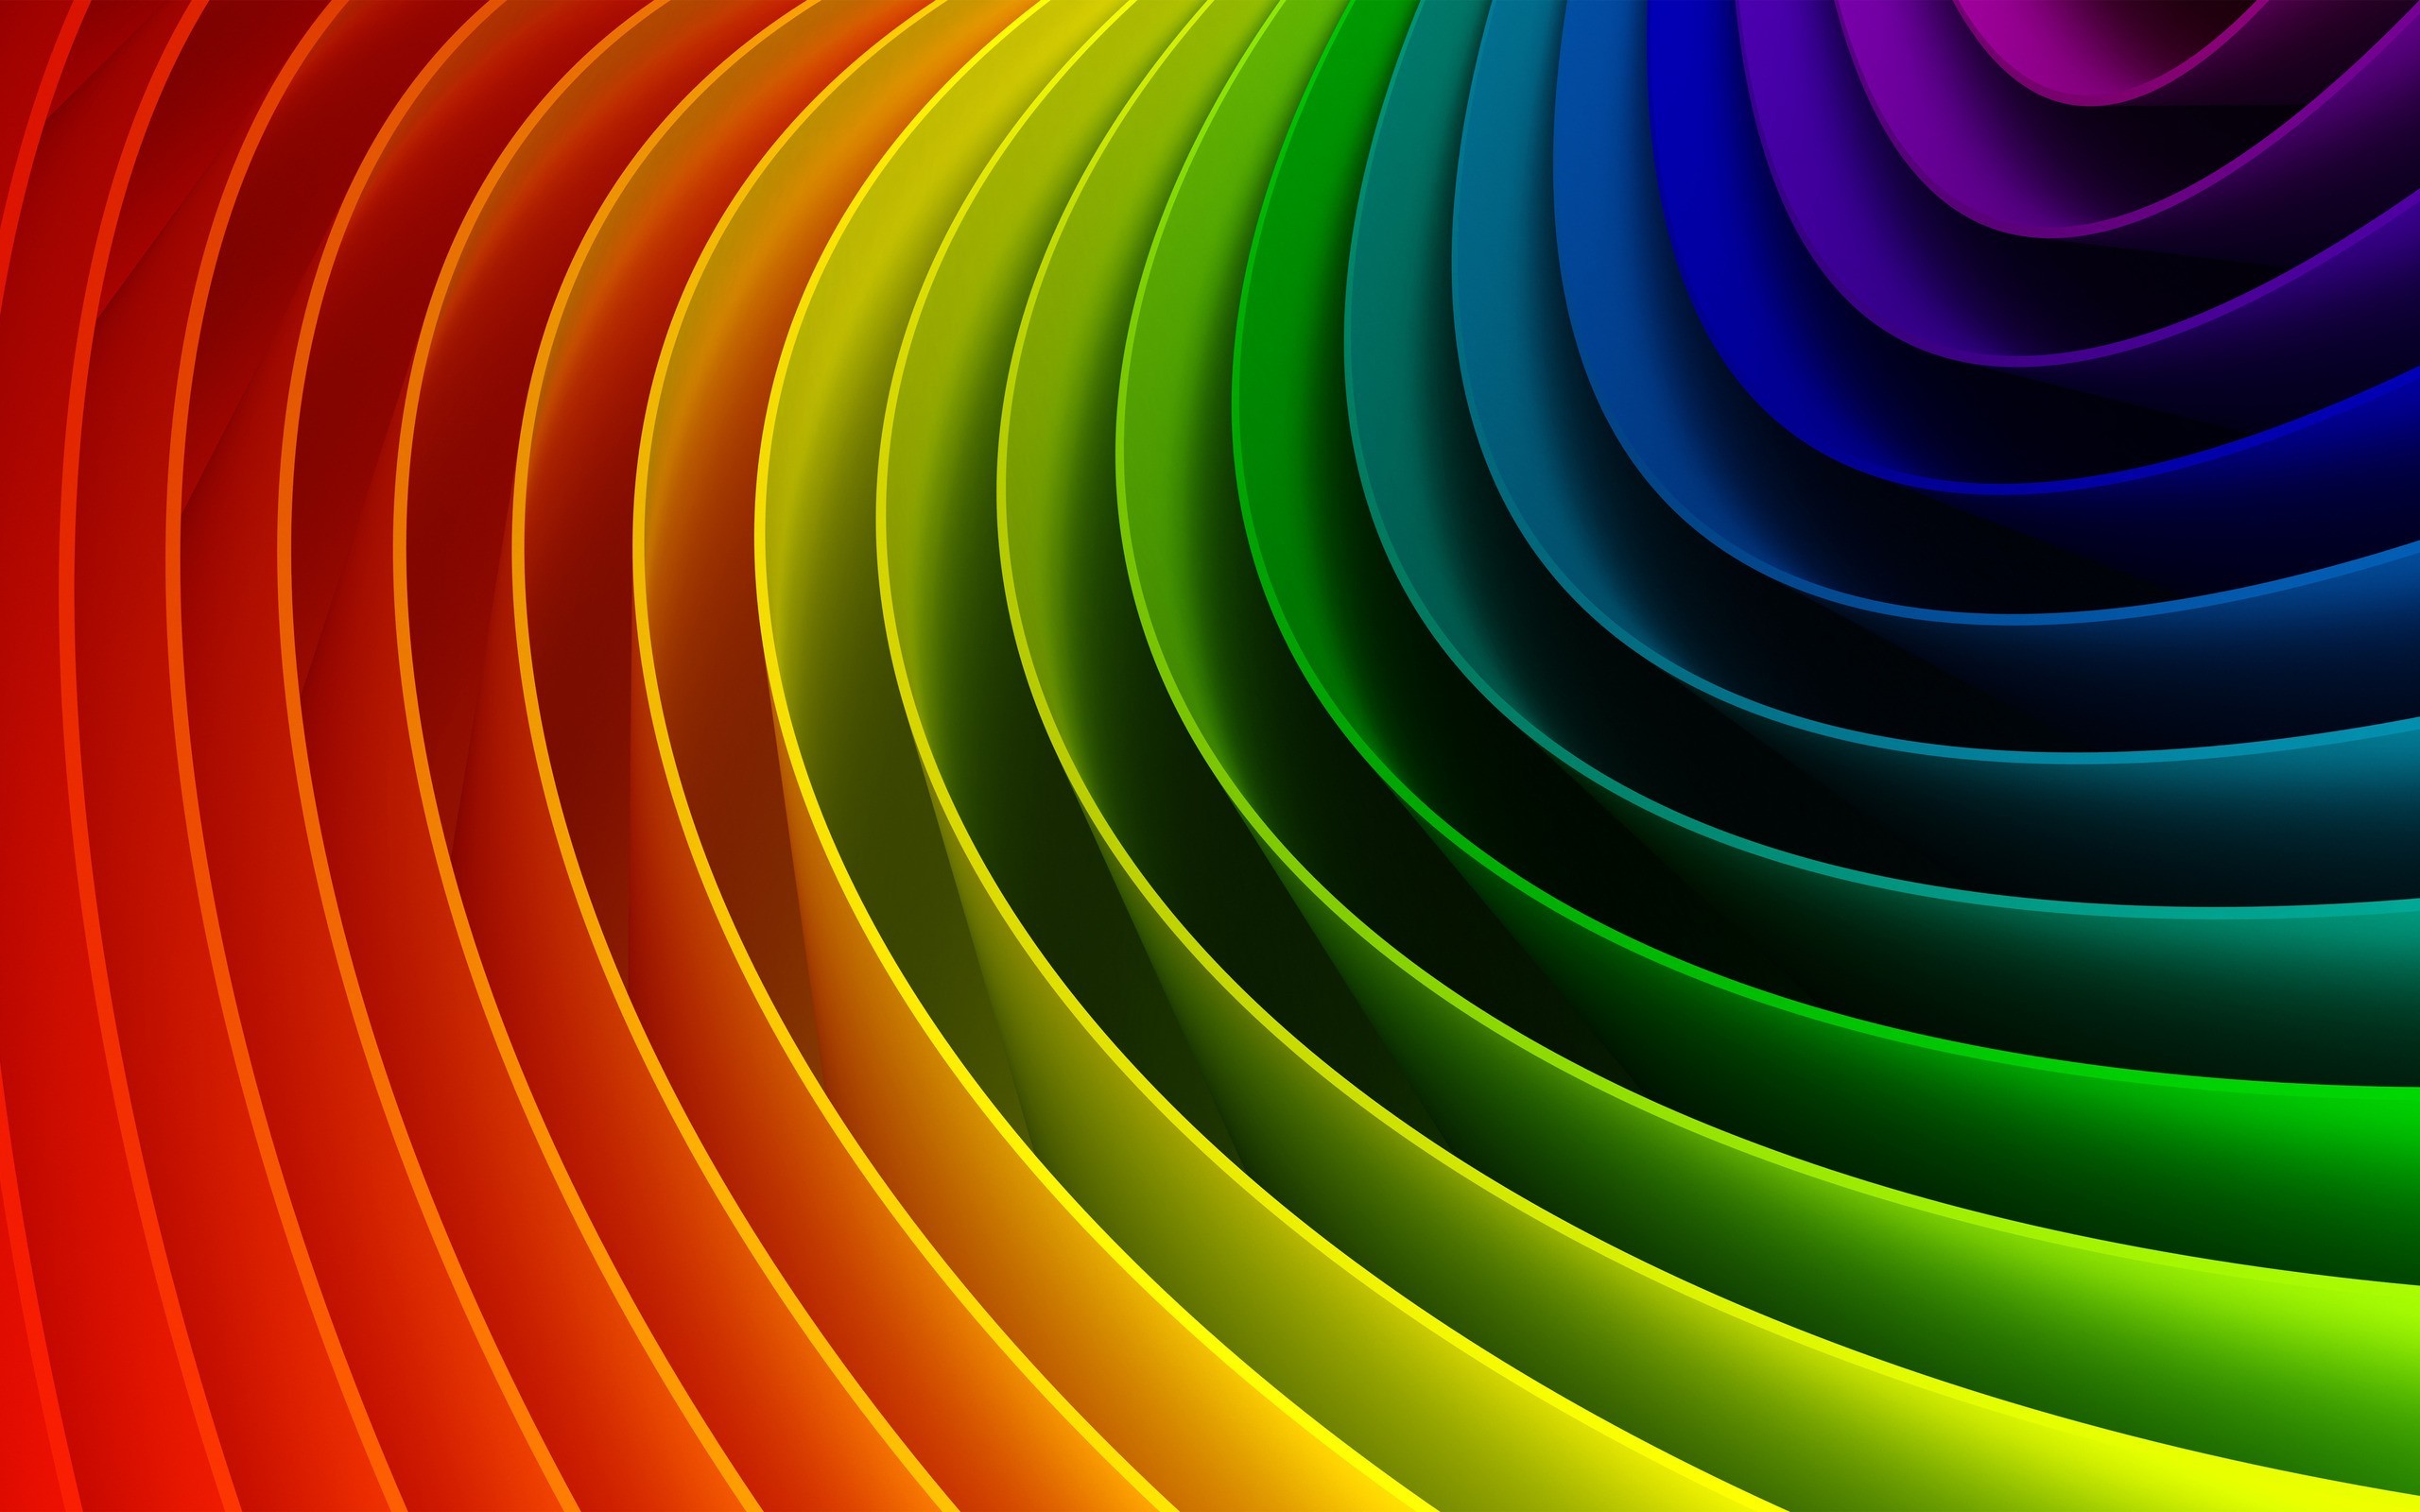 Related Image With Funky Colorful Rainbow Wallpaper HD Click To